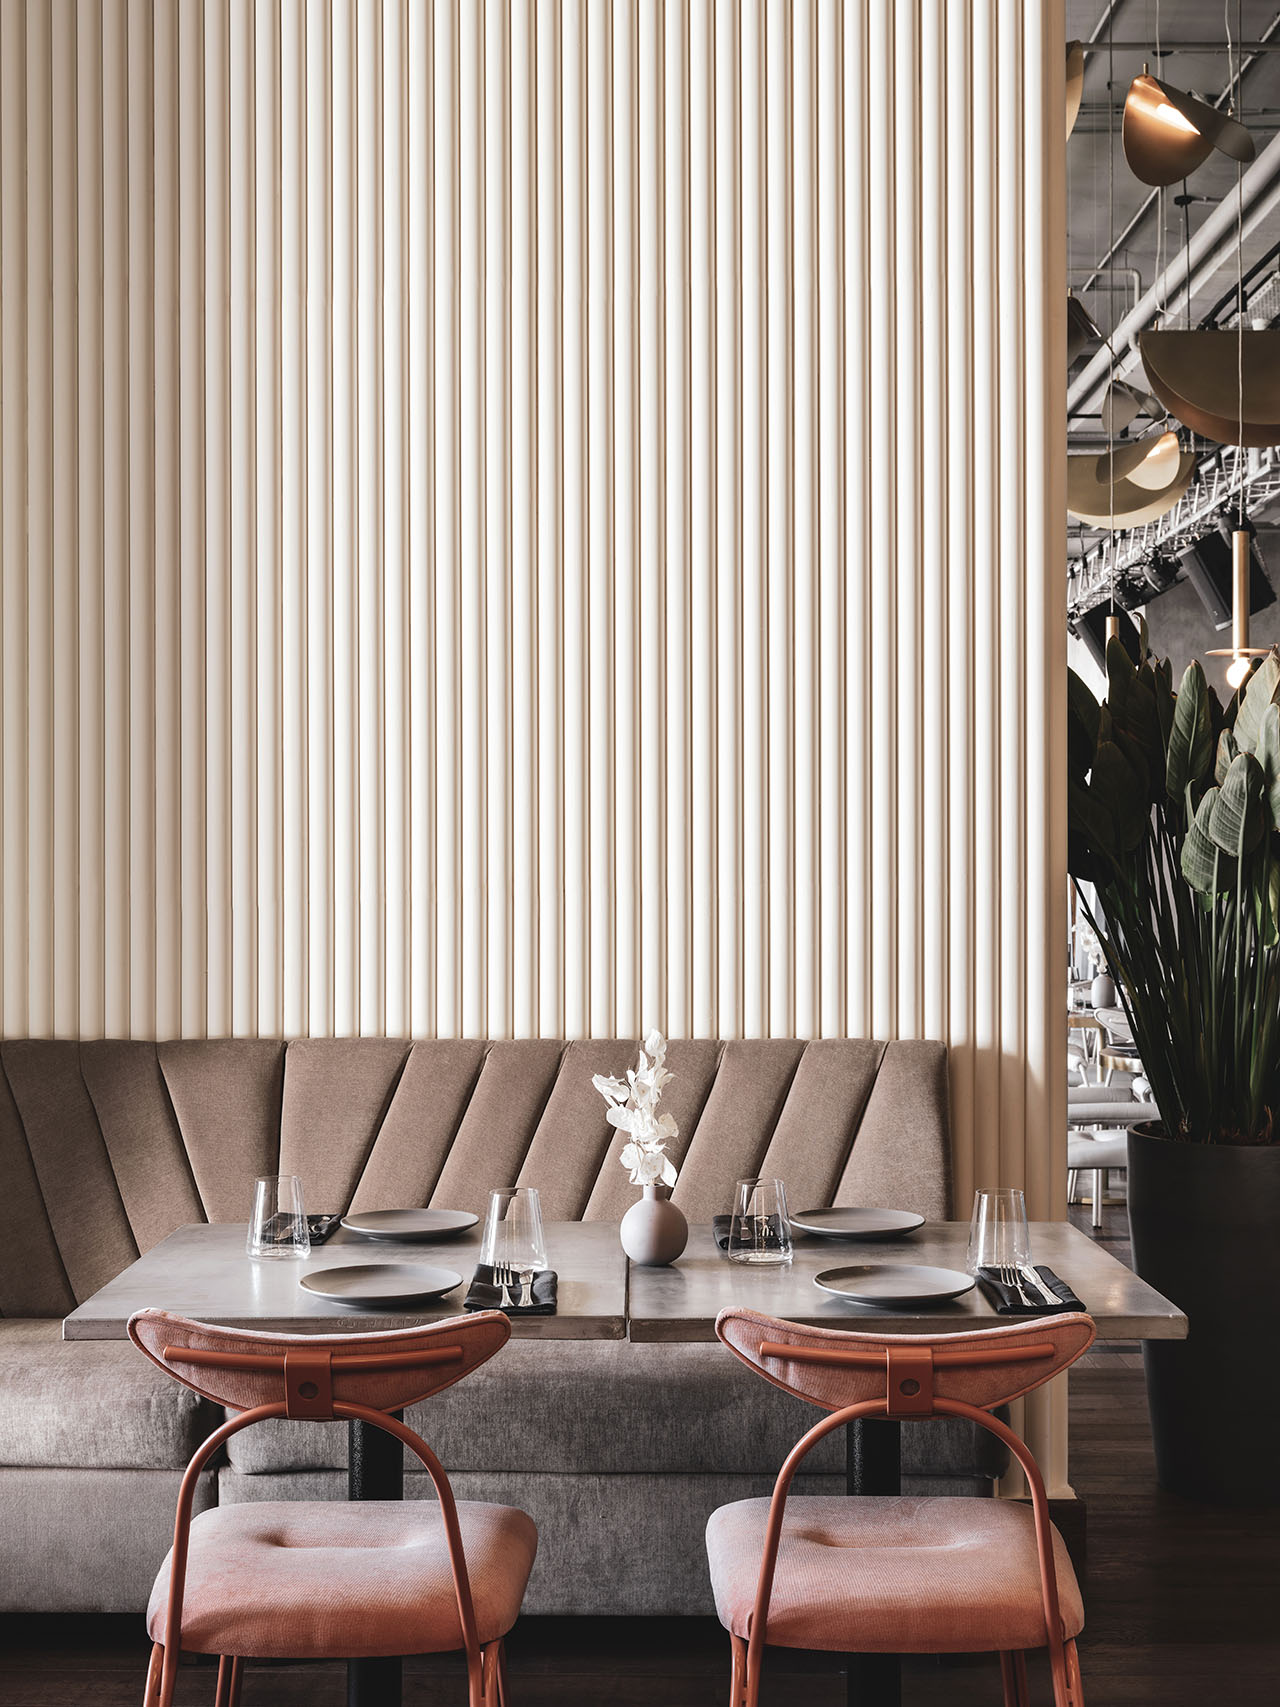 Polet Café by Asthetique in Moscow, Russia. Photography by Mikhail Loskutov.